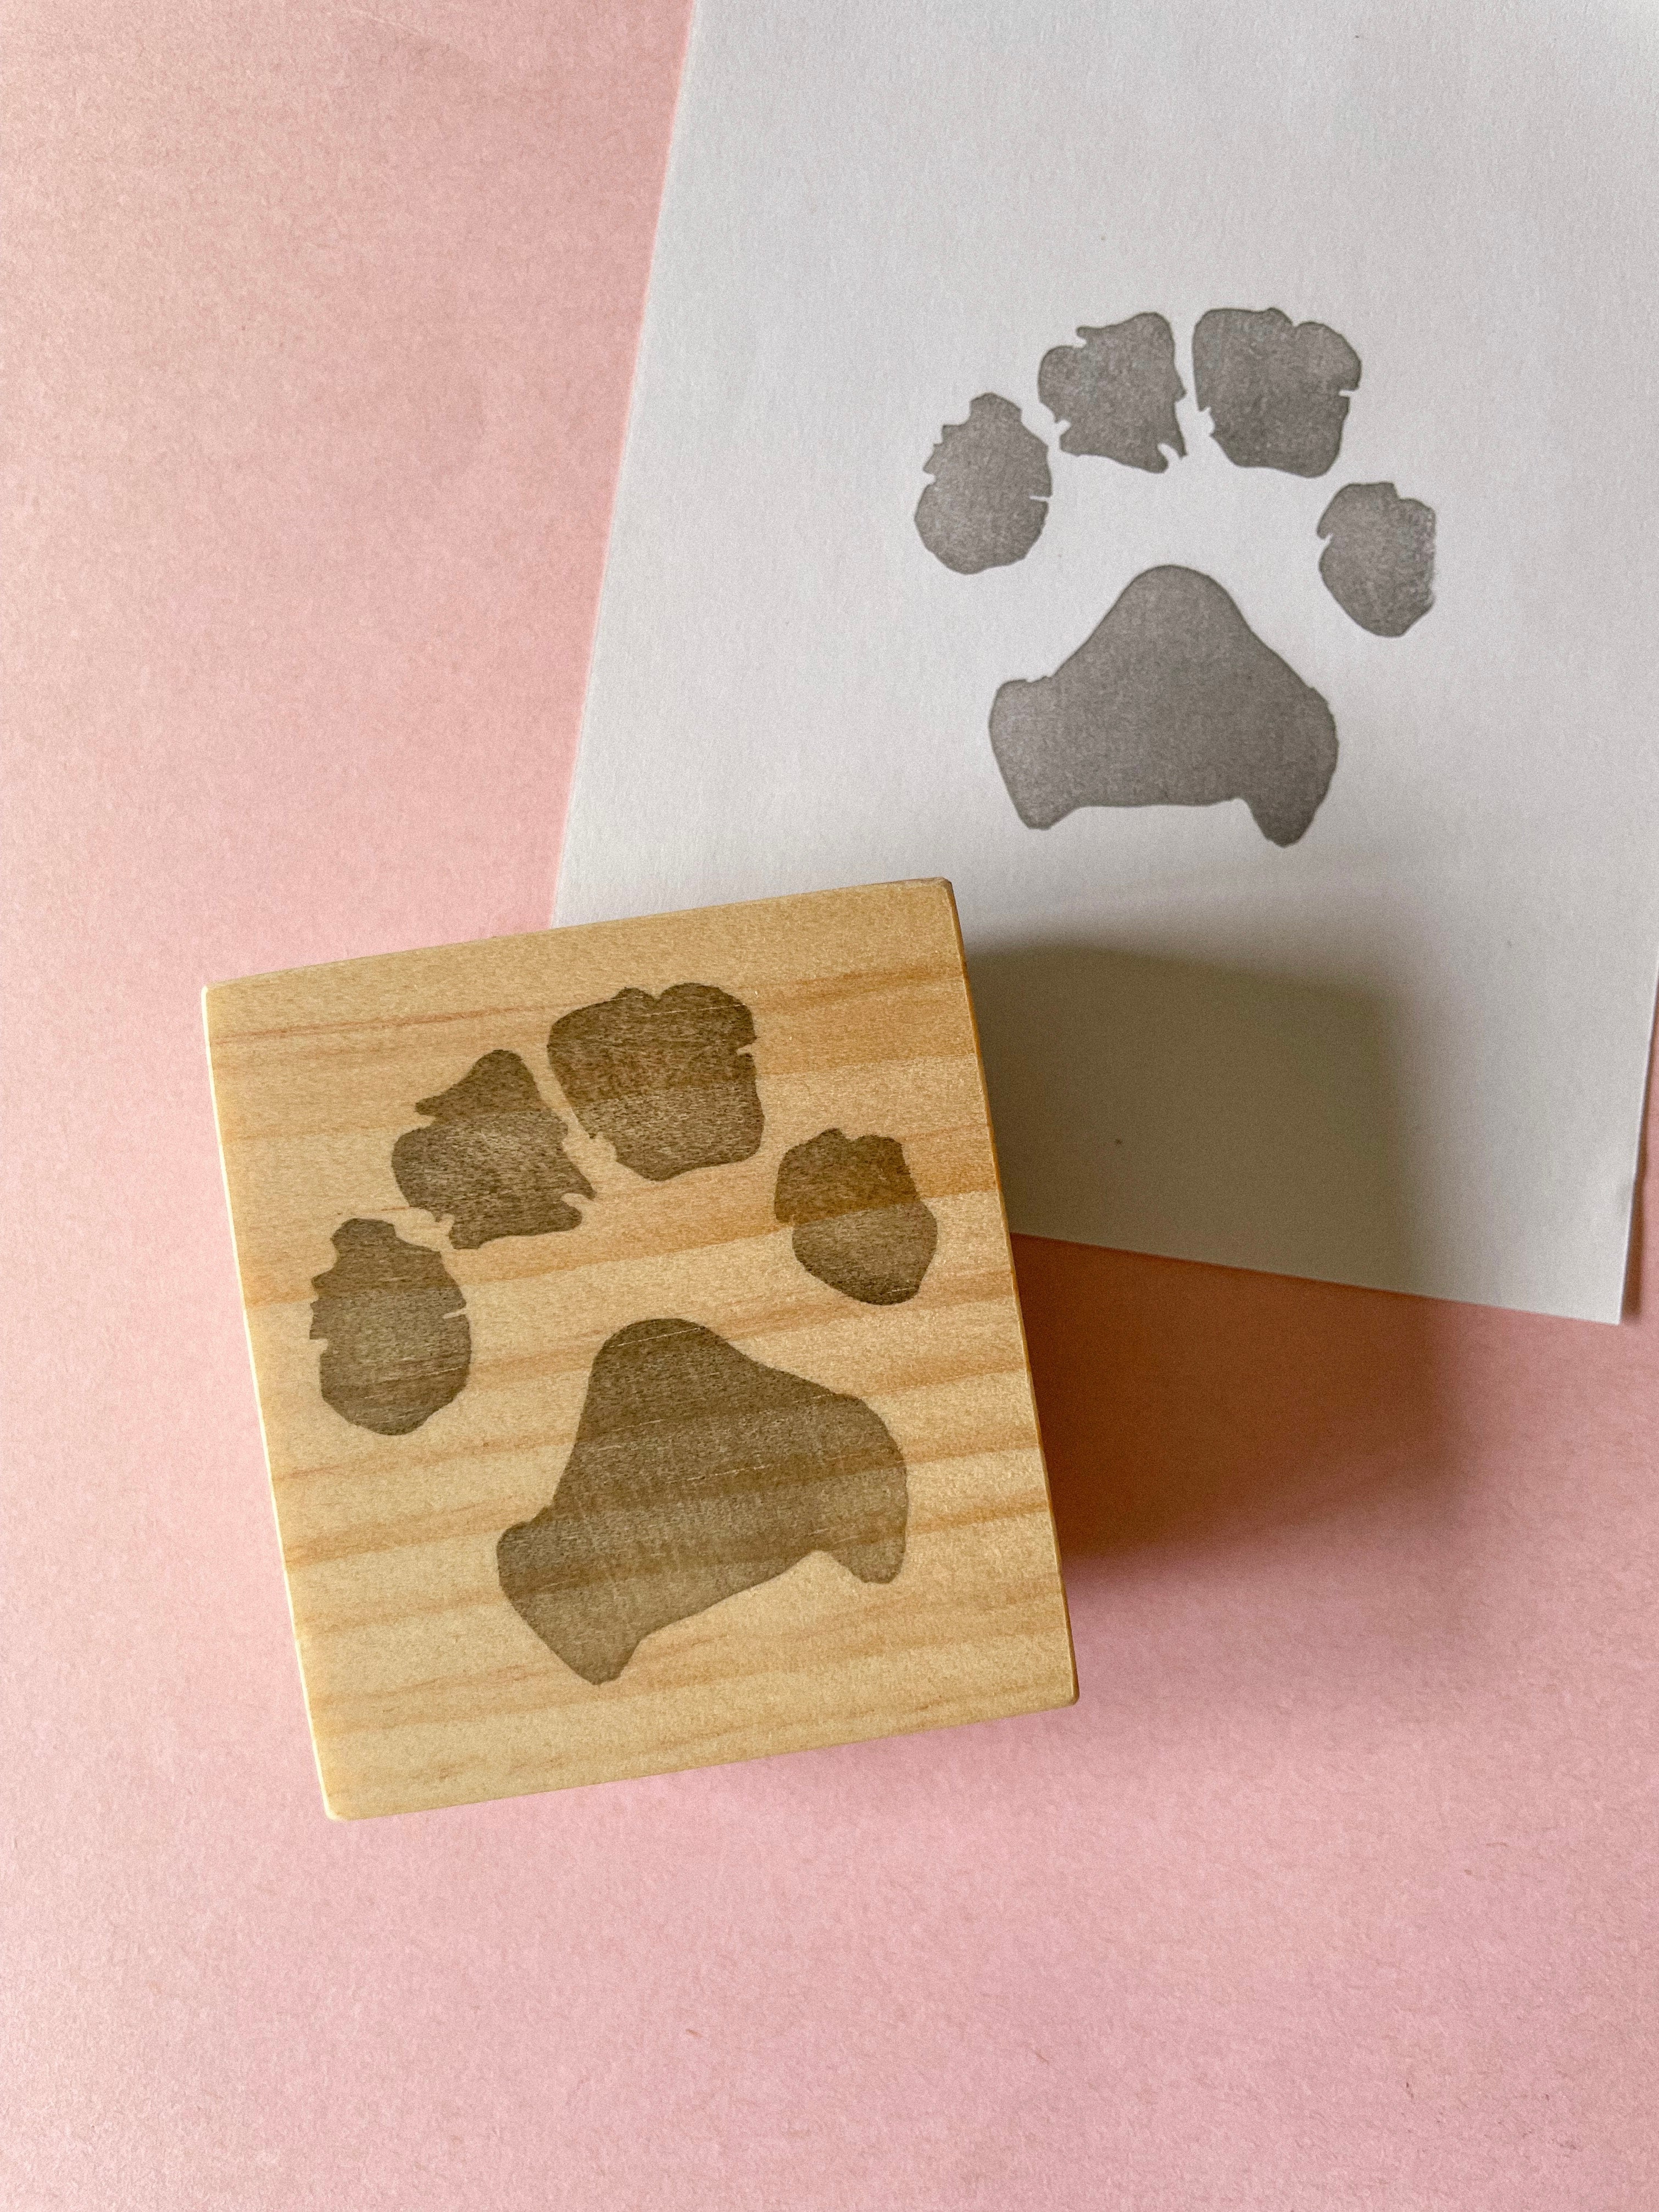 SCL-065 - Dog Paw Print Large Round Stamp by MKM Pottery Tools